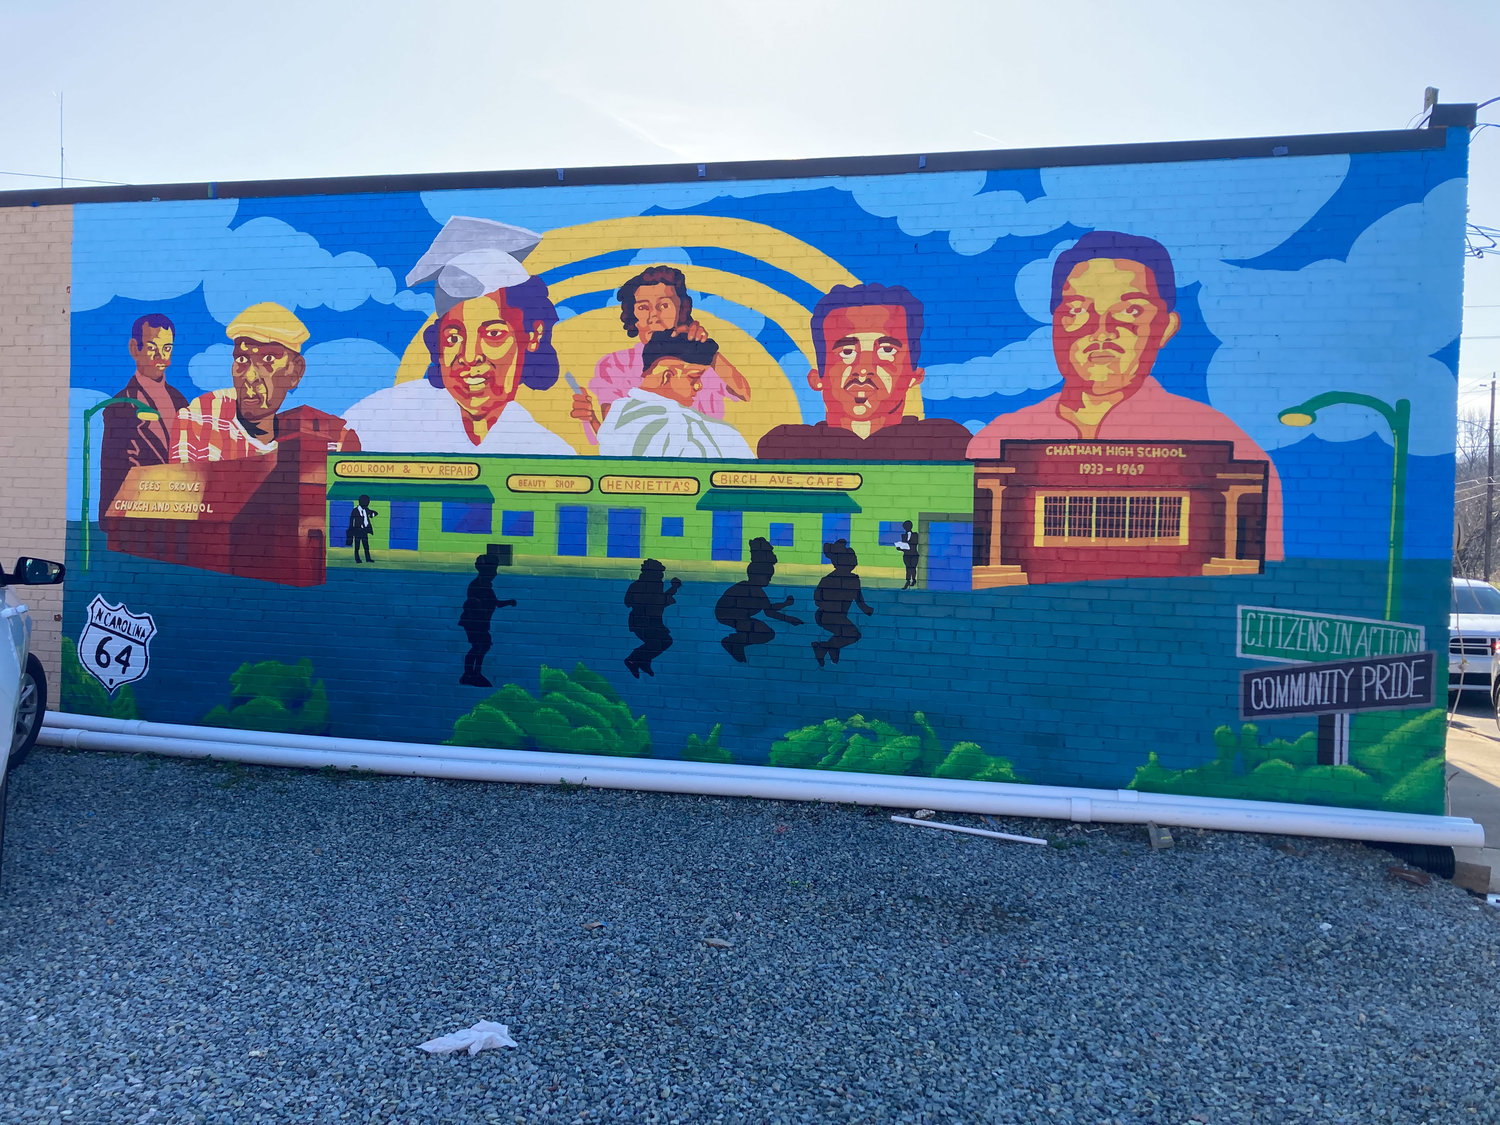 The 'Founders of Birch Avenue' mural was commissioned by the Siler City-based Citizens in Action organization.